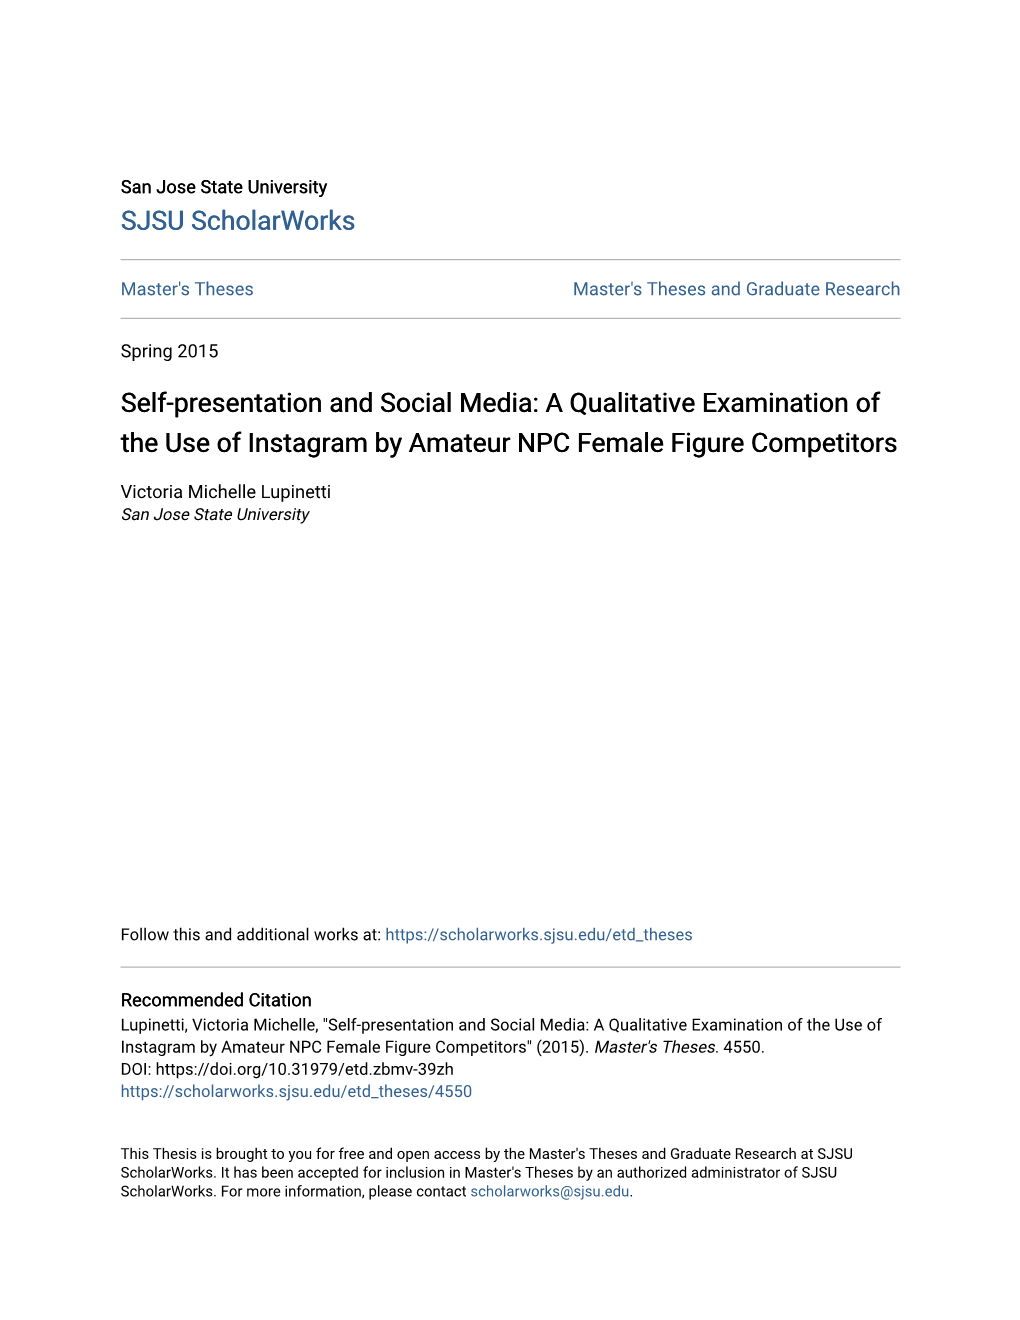 Self-Presentation and Social Media: a Qualitative Examination of the Use of Instagram by Amateur NPC Female Figure Competitors